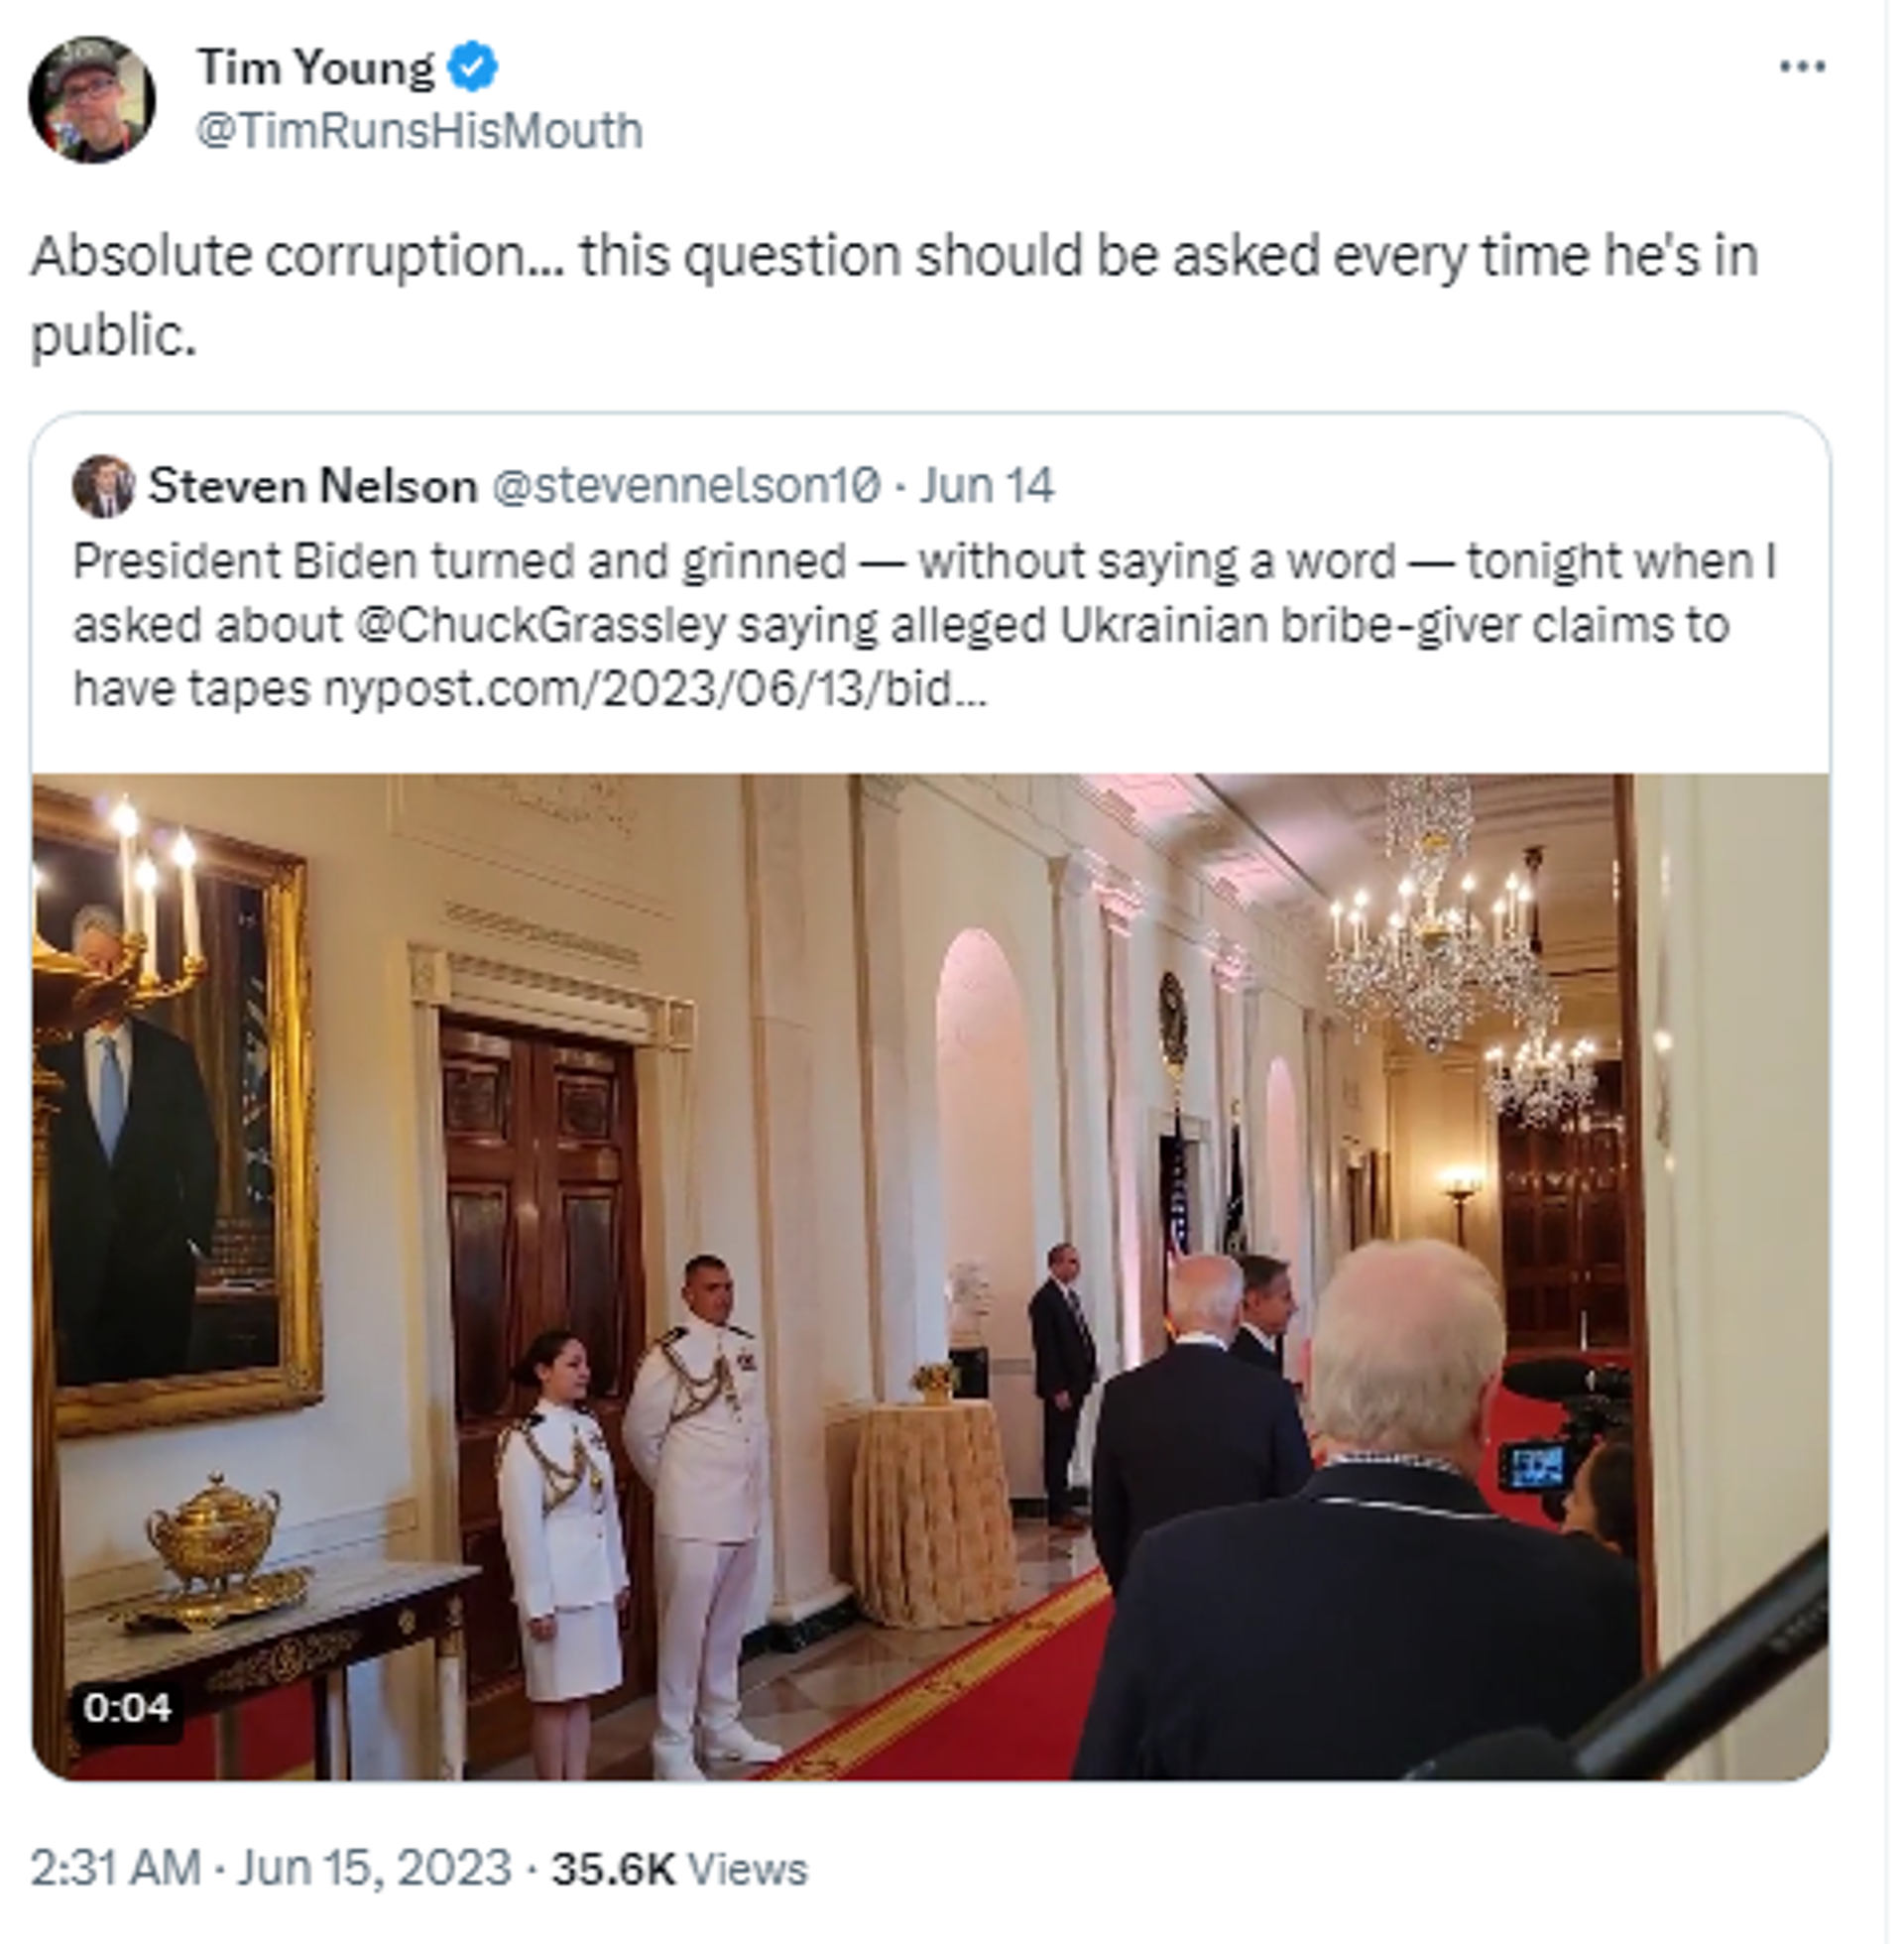 Screenshot of Twitter post by political comedian Tim Young with footage of US President Joe Biden leaving a While House event on June 14, 2023. - Sputnik International, 1920, 15.06.2023